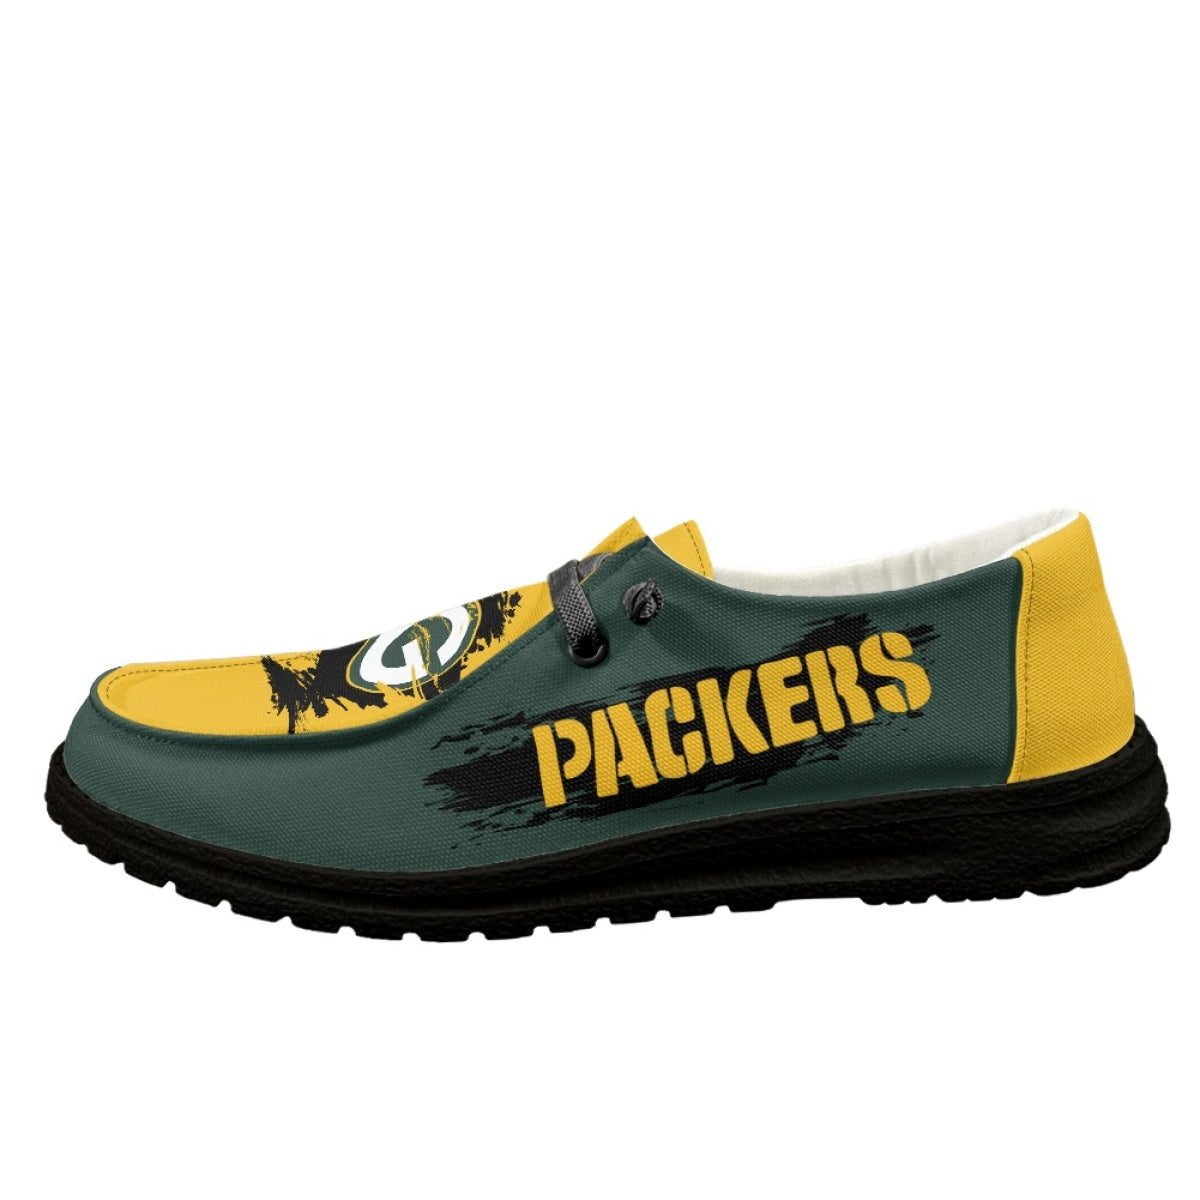 20% OFF Green Bay Packers Moccasin Slippers - Hey Dude Shoes Style – 4 ...